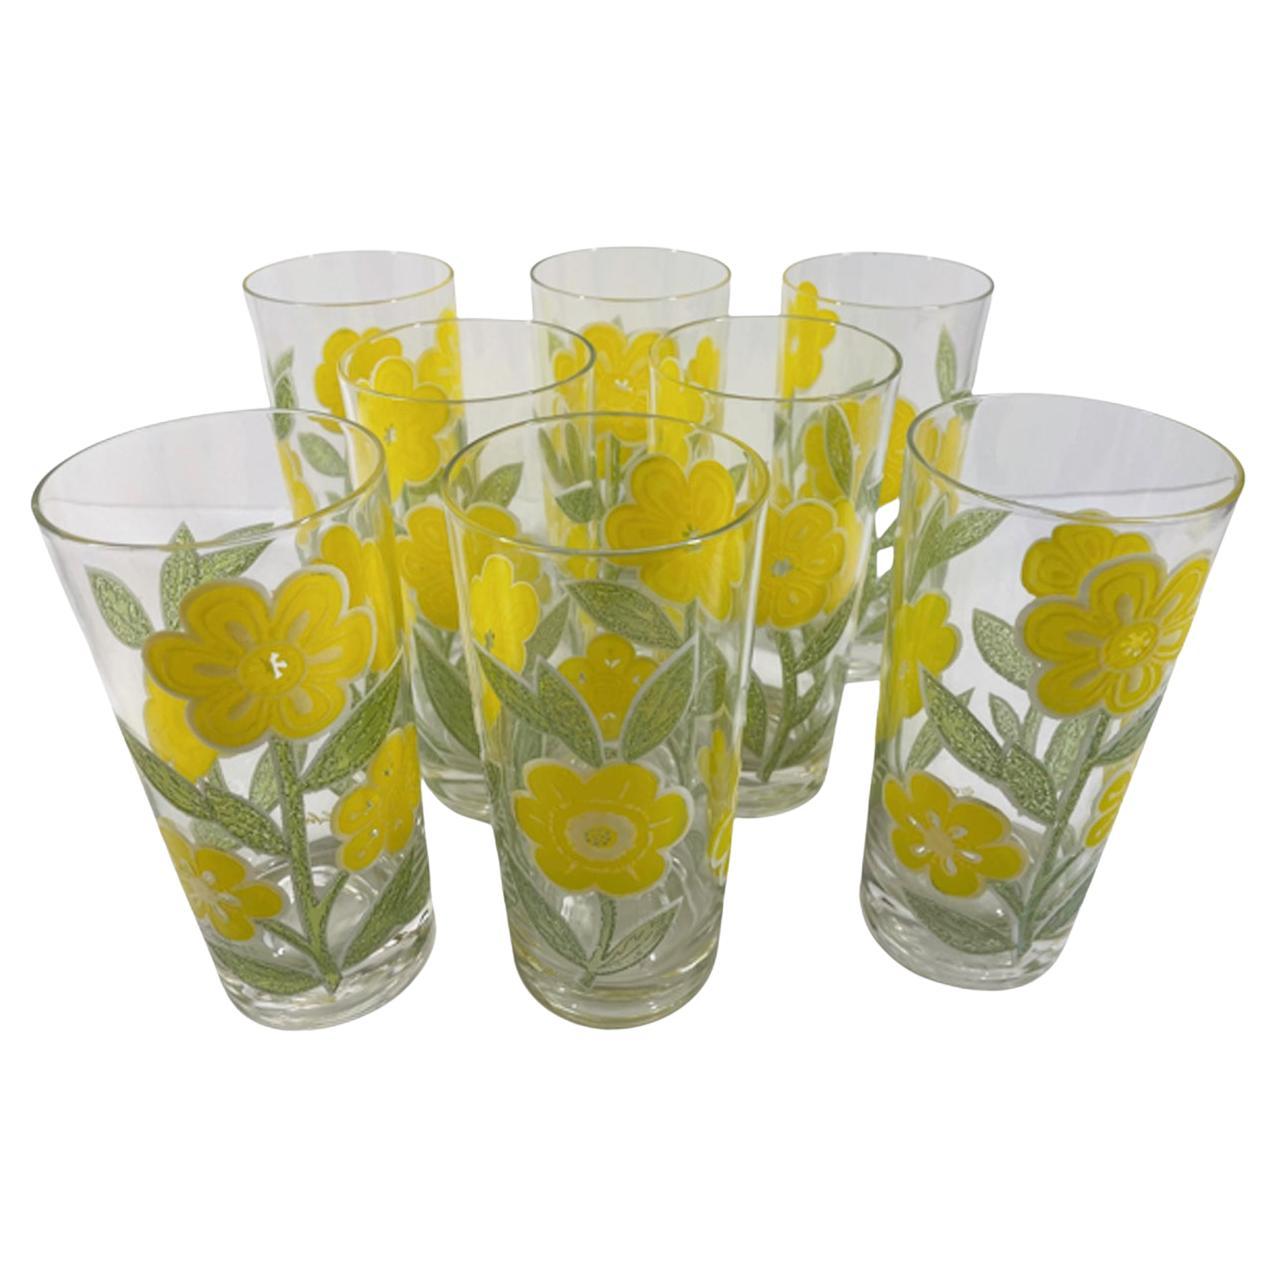 Eight Culver, LTD Mid-Century Highball Glasses in the "Petite Fleur" Pattern For Sale